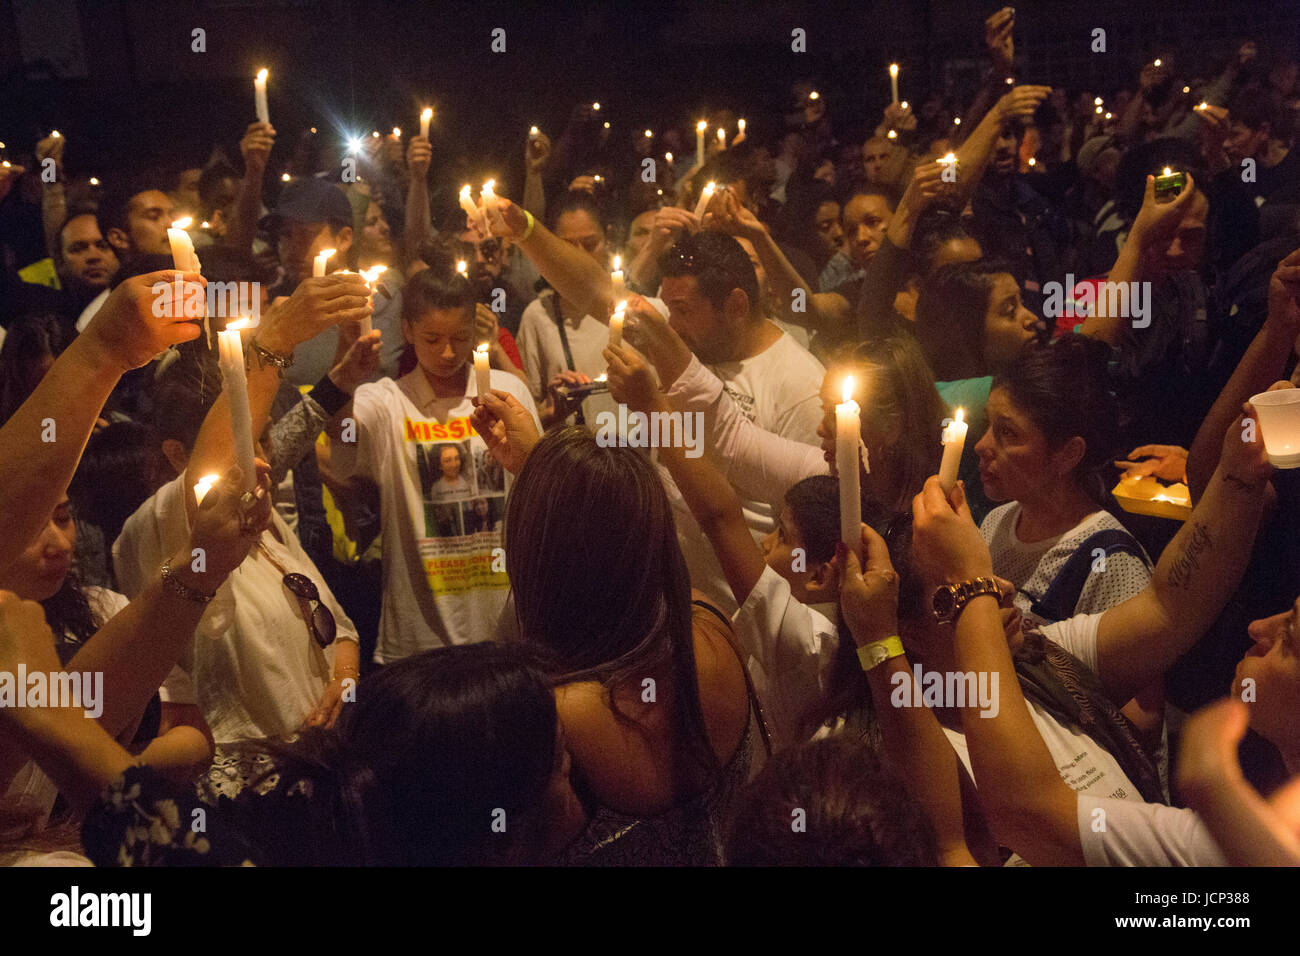 London, UK. 16th June, 2017. People hold candles during a vigil for victims Grenfell Tower fire as people demand justice for those affected by the fire that gutted Grenfell Tower, a residential tower block in west Lodon. Credit: Thabo Jaiyesimi/Alamy Live News Stock Photo